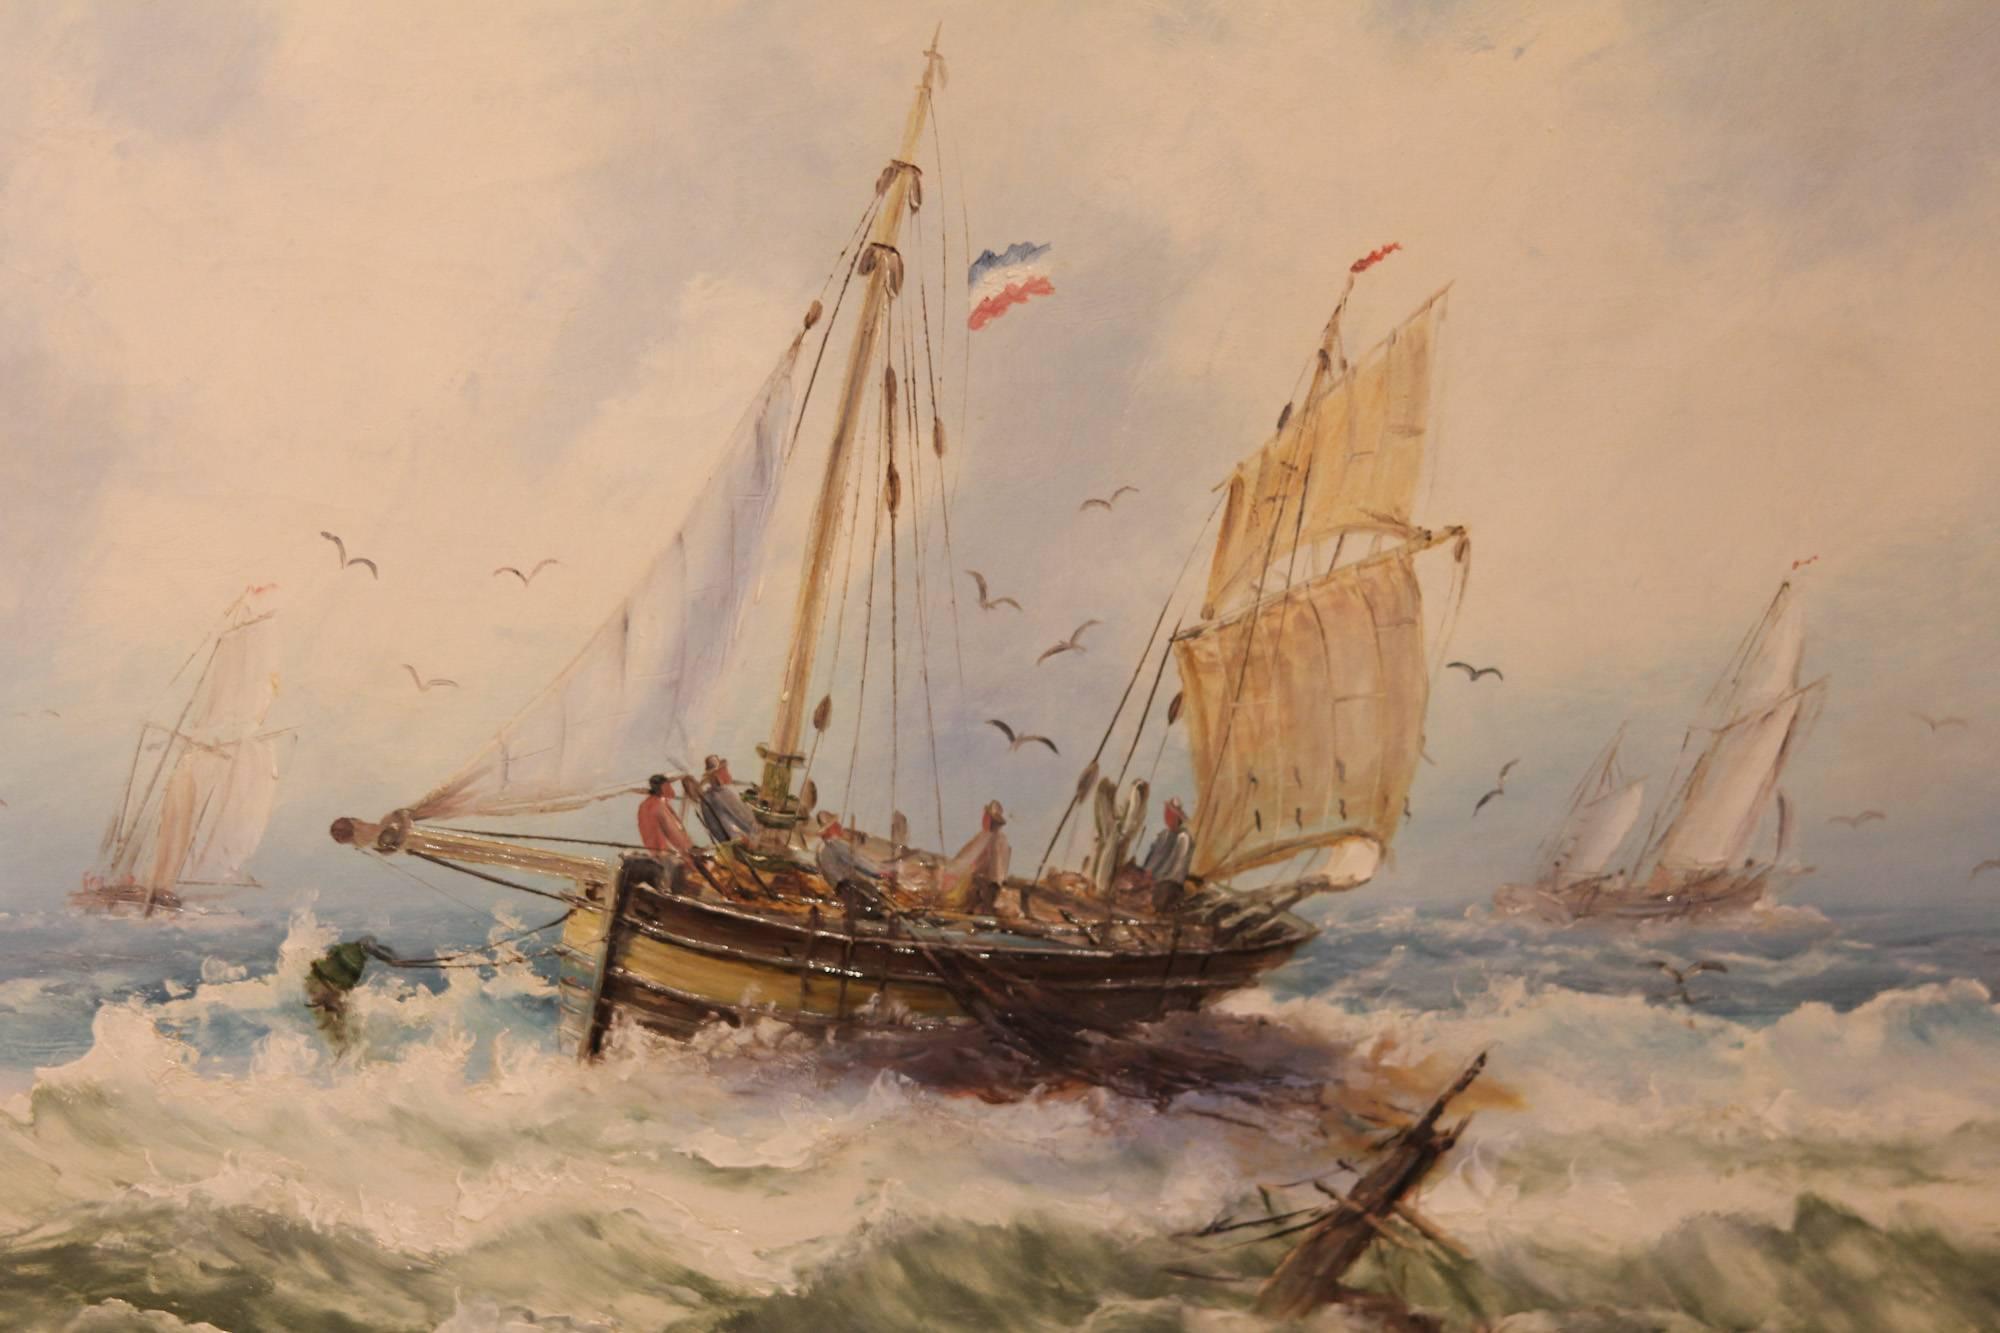 "Dutch Boats off the Suffolk Coast " oil painting by Thomas Westcott.  Thomas Westcott flourished 1869-1912, lived in Suffolk, exhibited Ipswich Art Society.  Oil on canvas, 12x20" signed and dated (19)'08.
 
 
All of the items